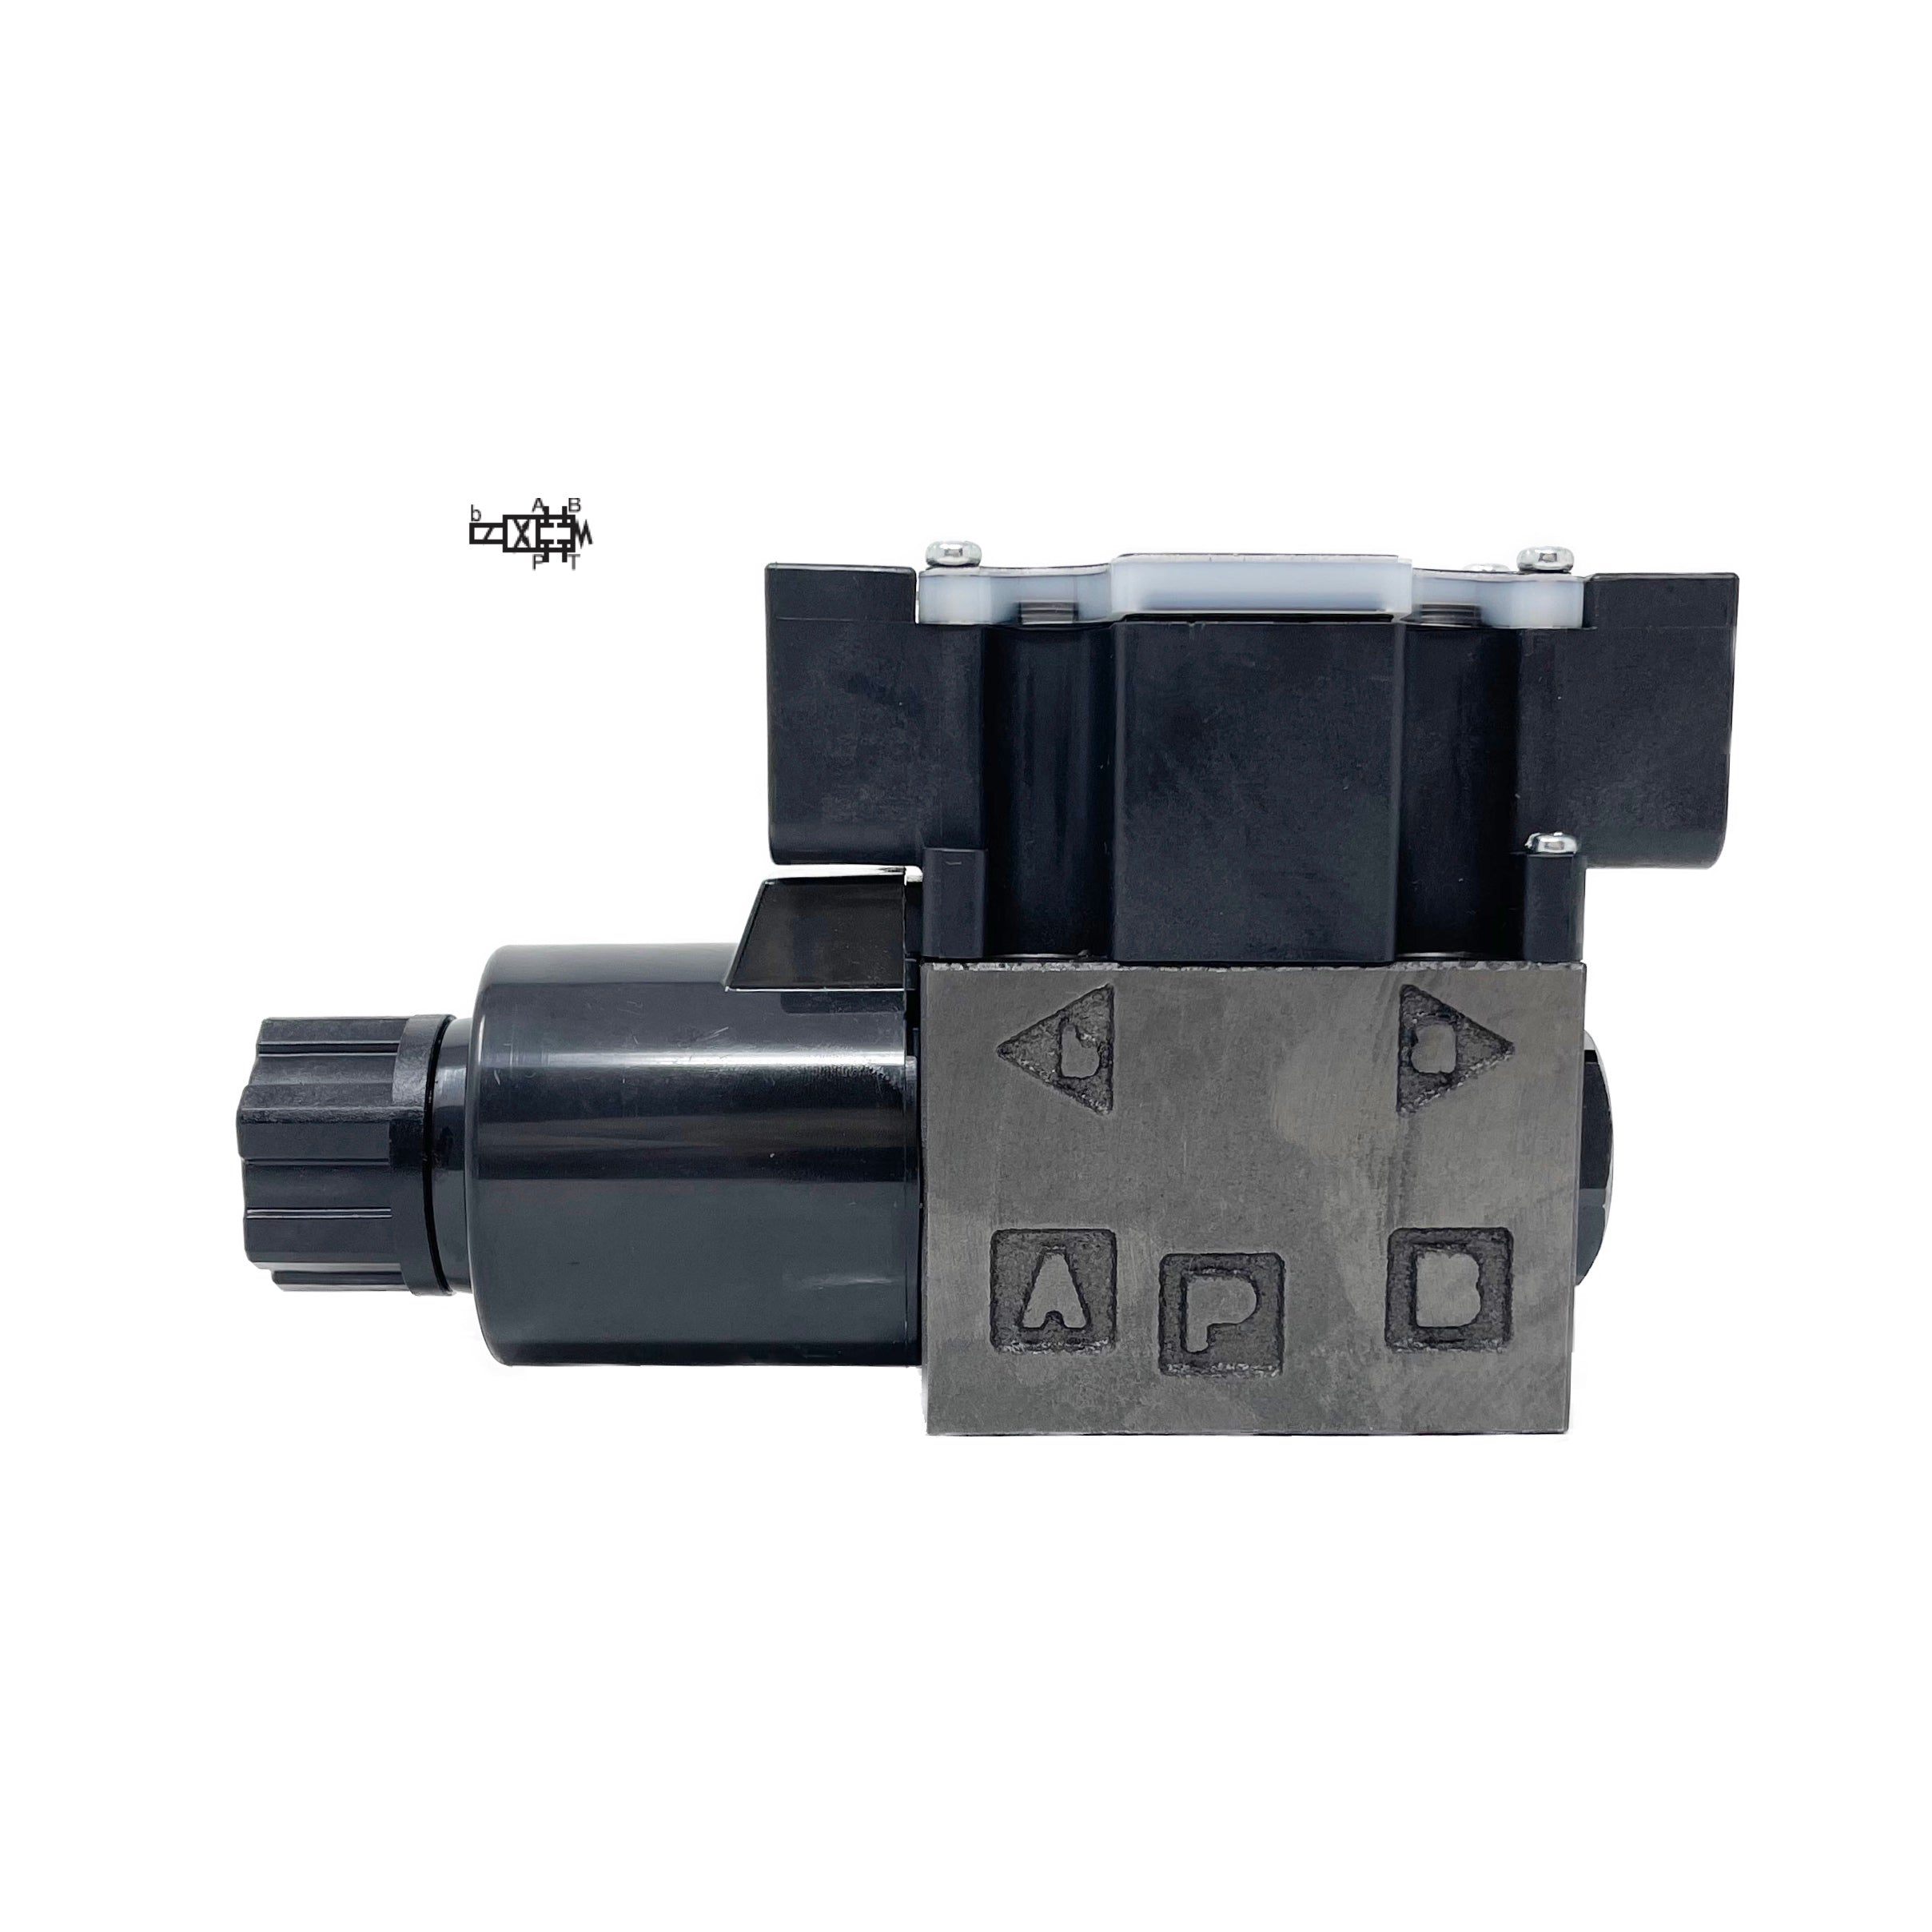 SS-G01-A5-R-C115-E31 : Nachi Solenoid Valve, 3P4W, D03 (NG6), 26.4GPM, 5075psi, All Ports Blocked Neutral, 110 VAC, Wiring Box with Lights